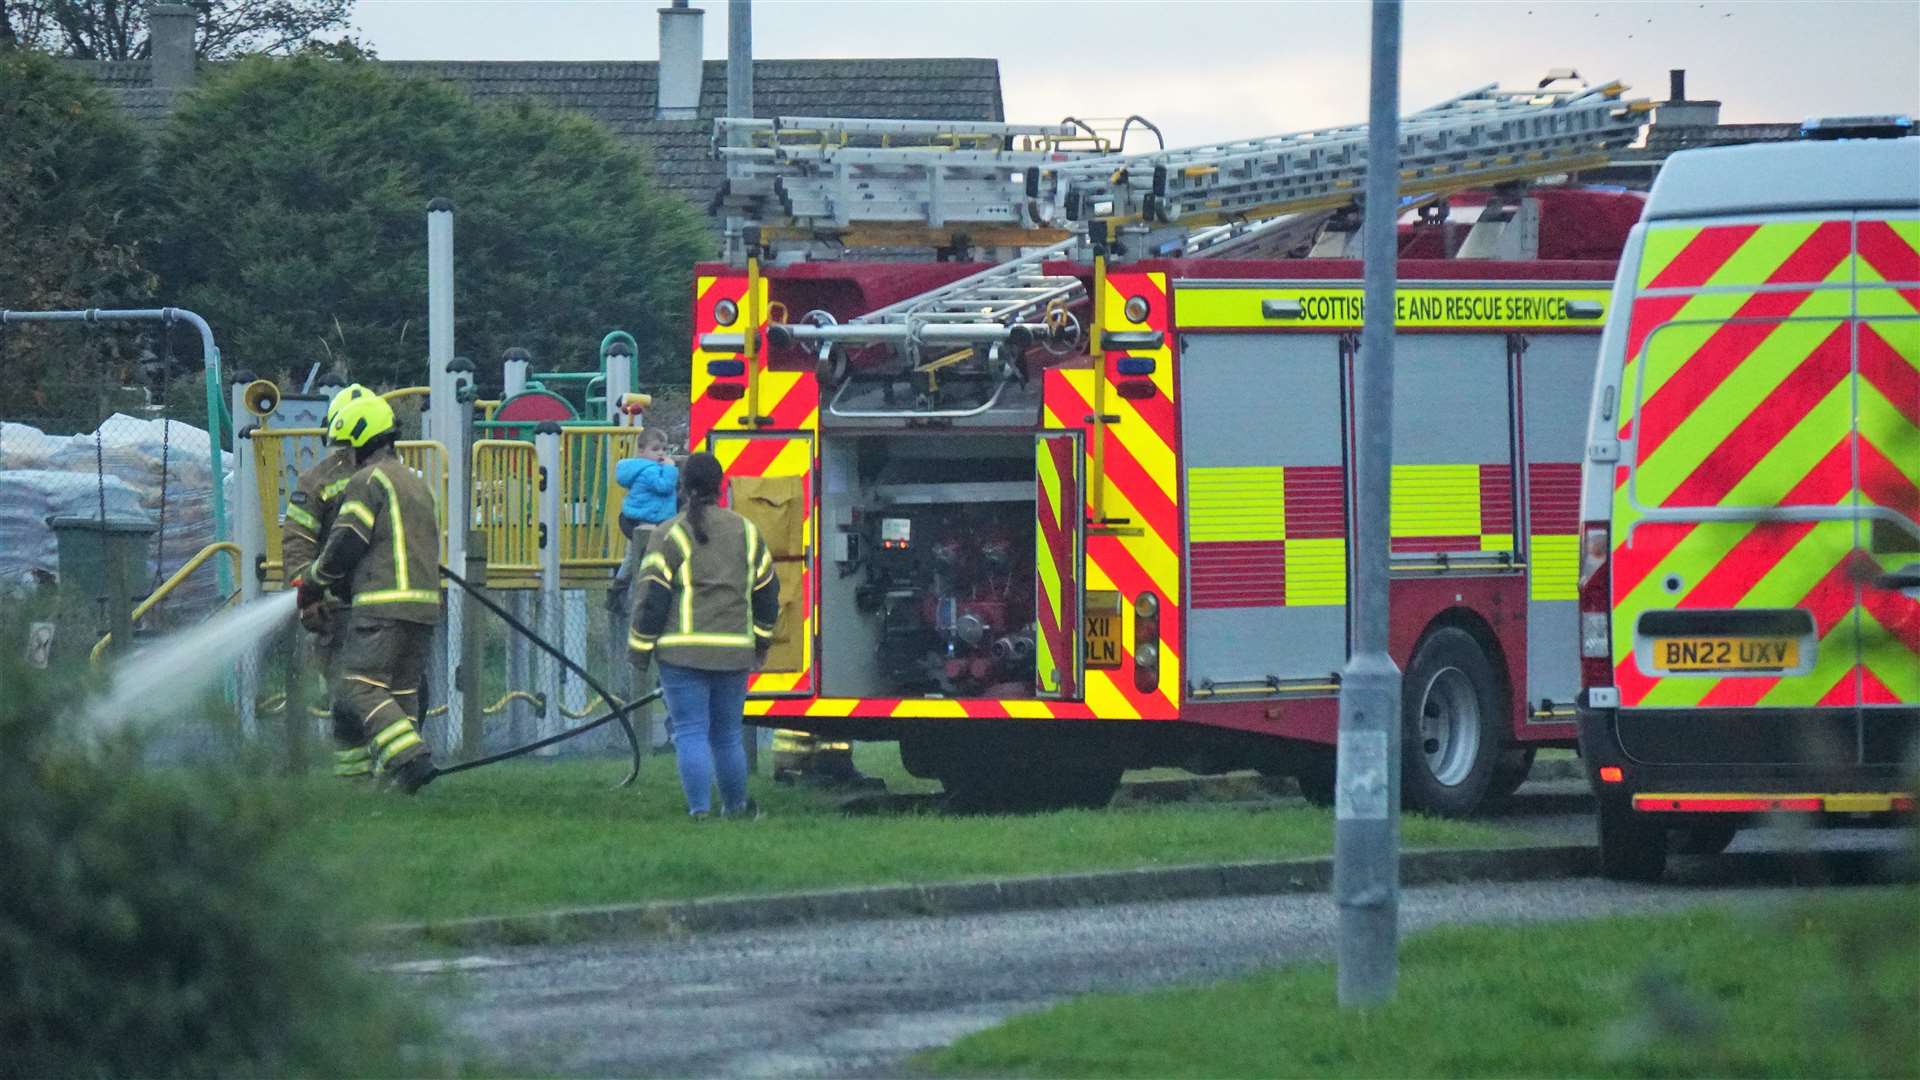 Fire appliances attend an incident in Watten when fire broke out at a small building by the children's playground. There were no casualties. Picture: DGS